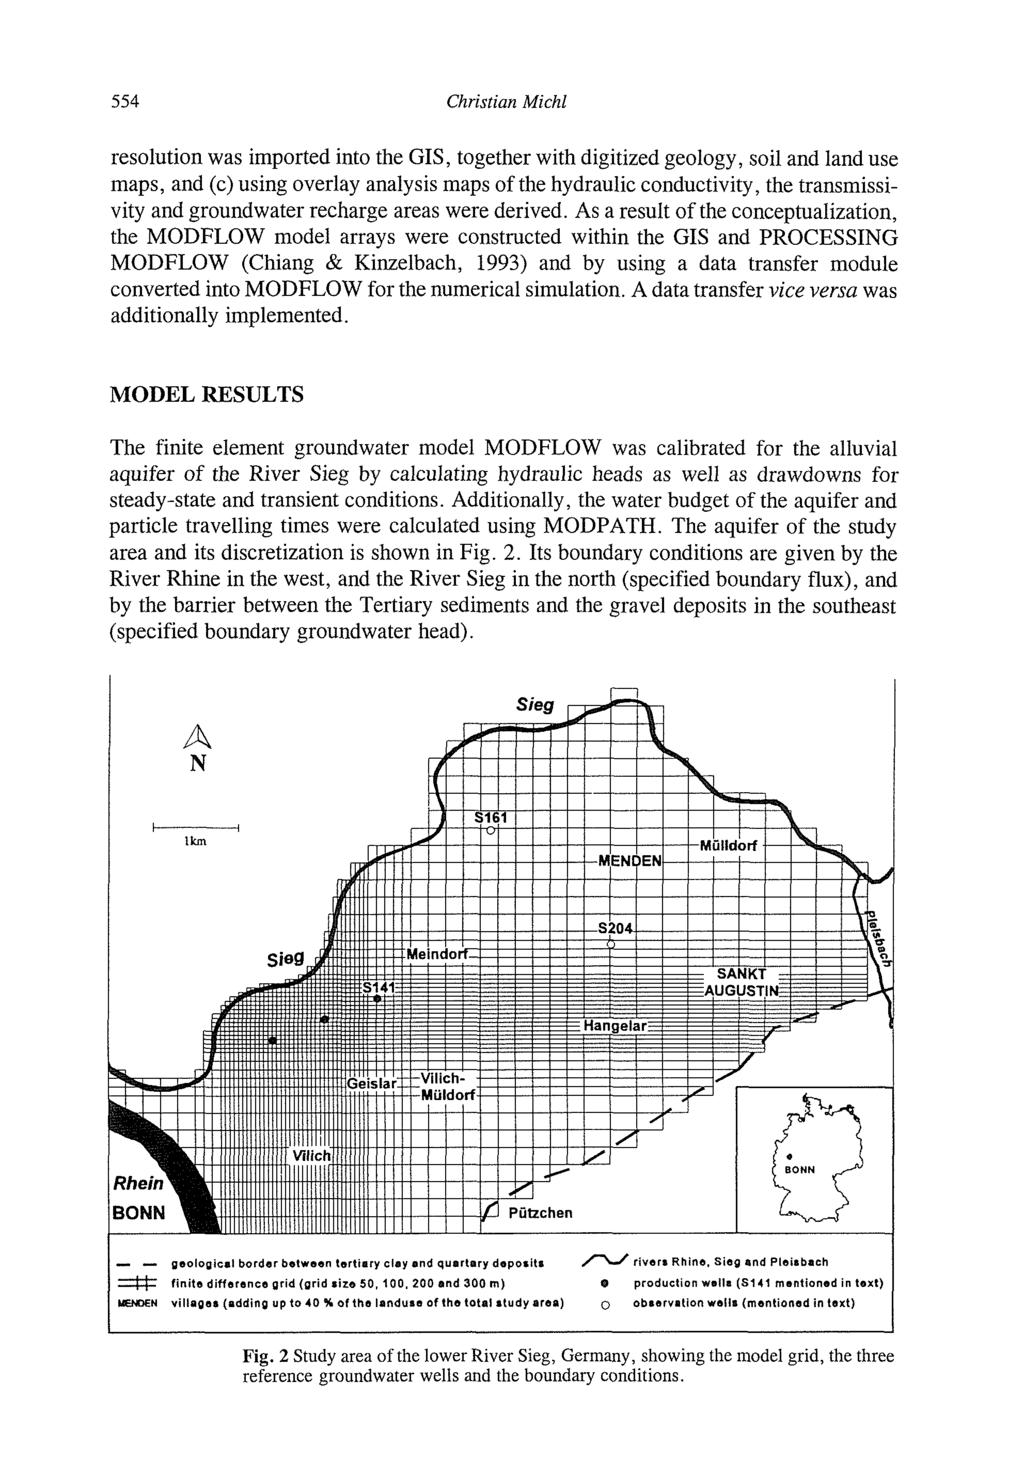 554 Christian Michl resolution was imported into the GIS, together with digitized geology, soil and land use maps, and (c) using overlay analysis maps of the hydraulic conductivity, the